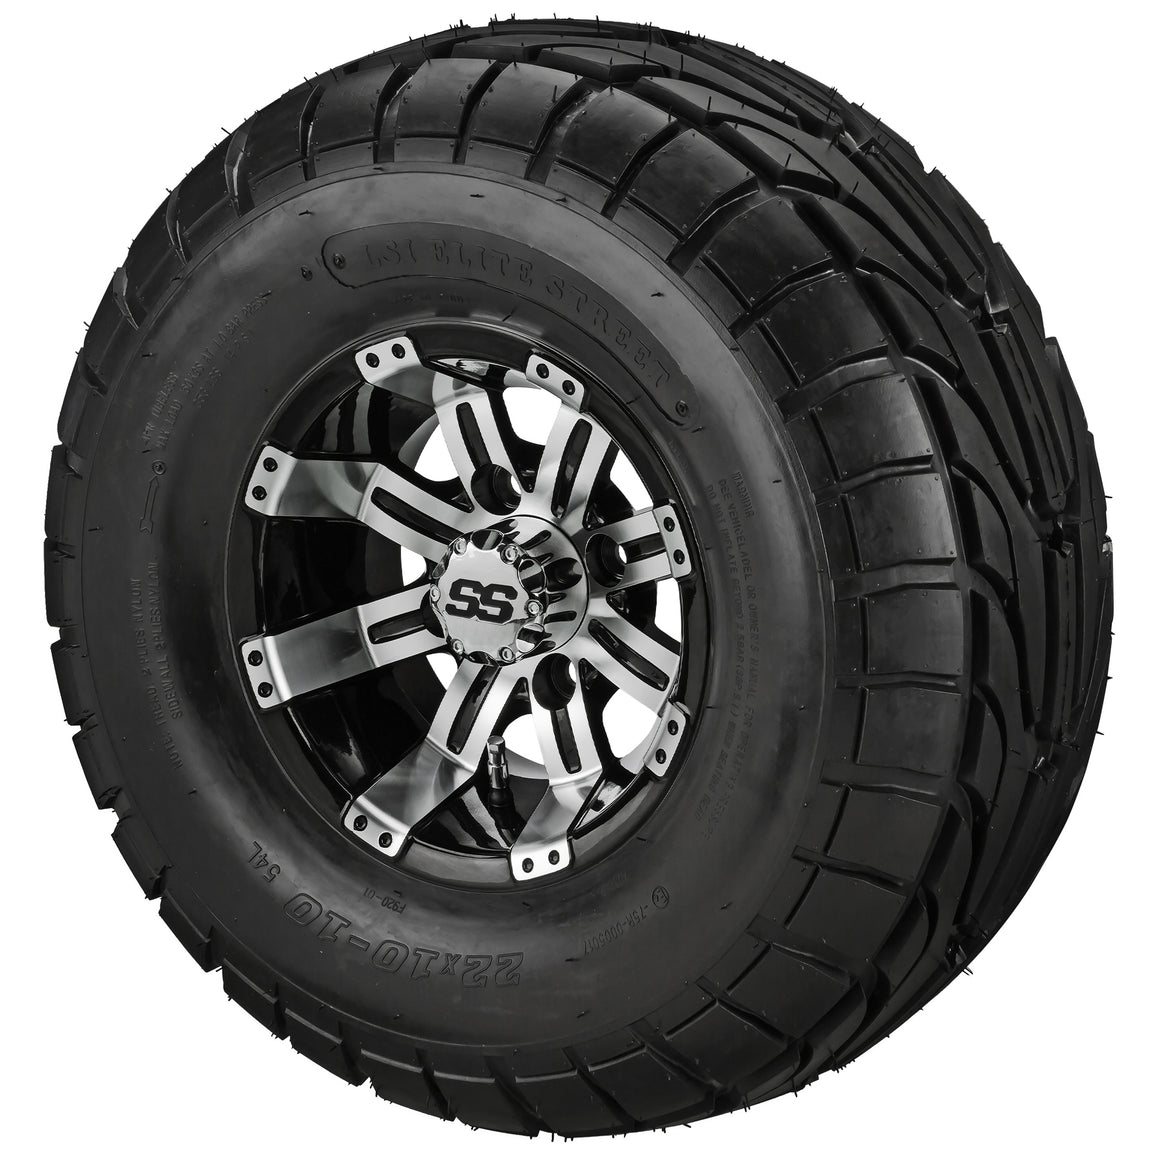 10" Casino Wheels on 22x10.00-10 LSI Elite A/T Tires Combo